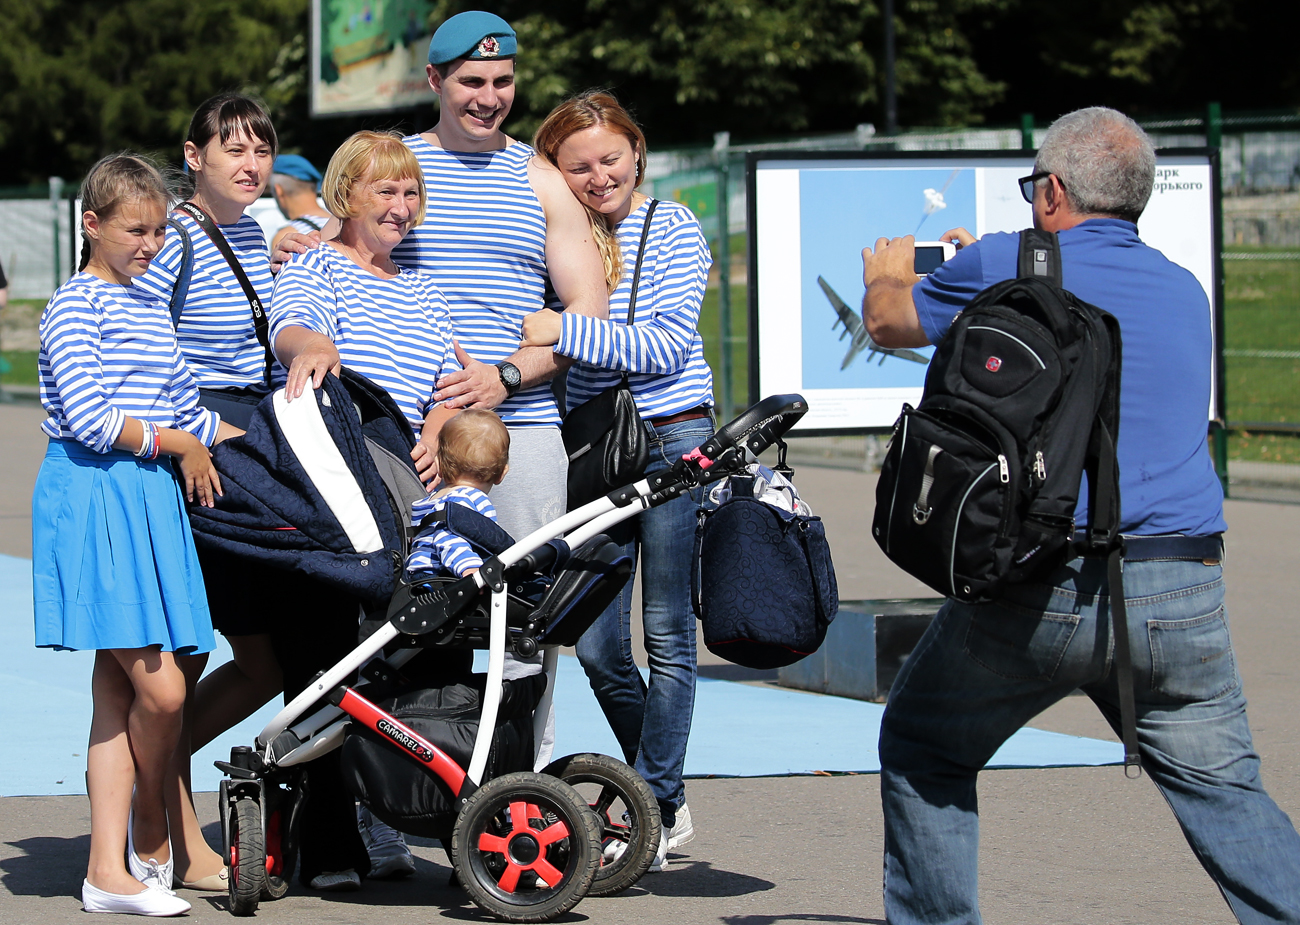  Former Russian paratrooper with his family poses for the picture at the Gorky Park, during the Russian 'Paratroopers Day' celebrations in Moscow. Source: EPA